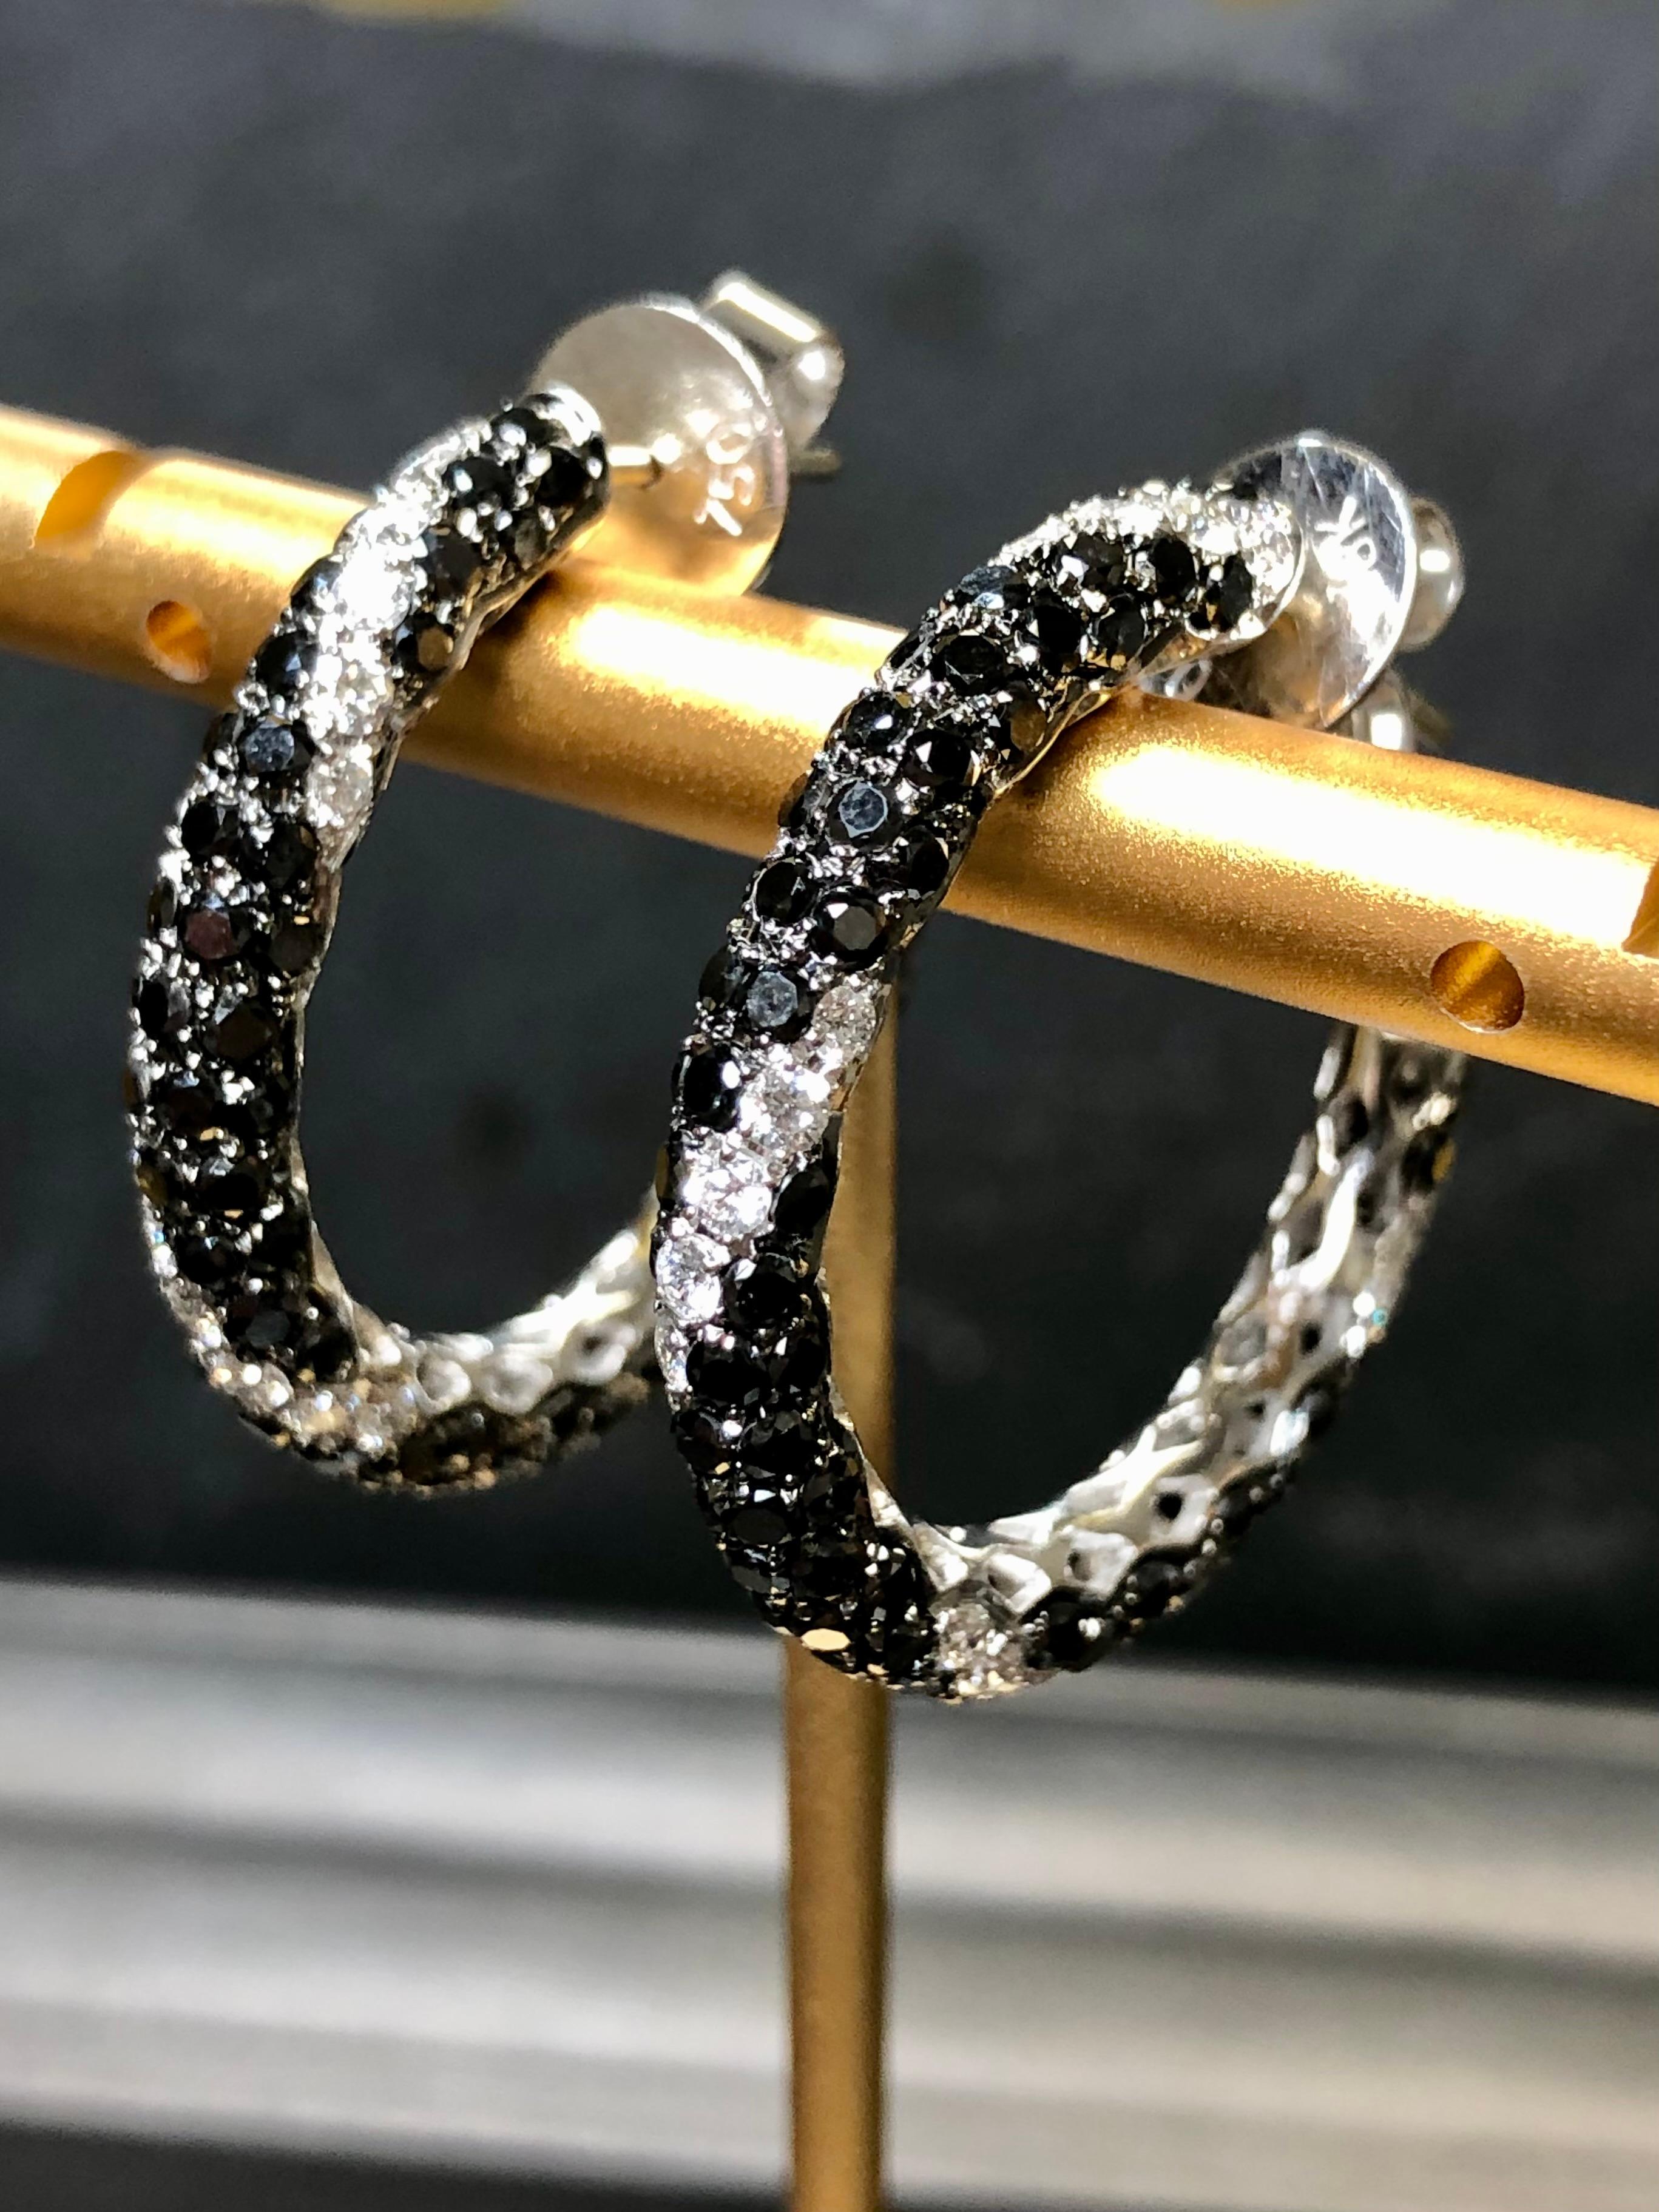 Contemporary earrings done in 18K white gold set with 5.43cttw (stamped weight) in black and white natural diamonds (1.20cttw in white/4.23cttw in black). White diamonds range G-I in color and Vs2-Si1 in clarity. These earrings come with oversized